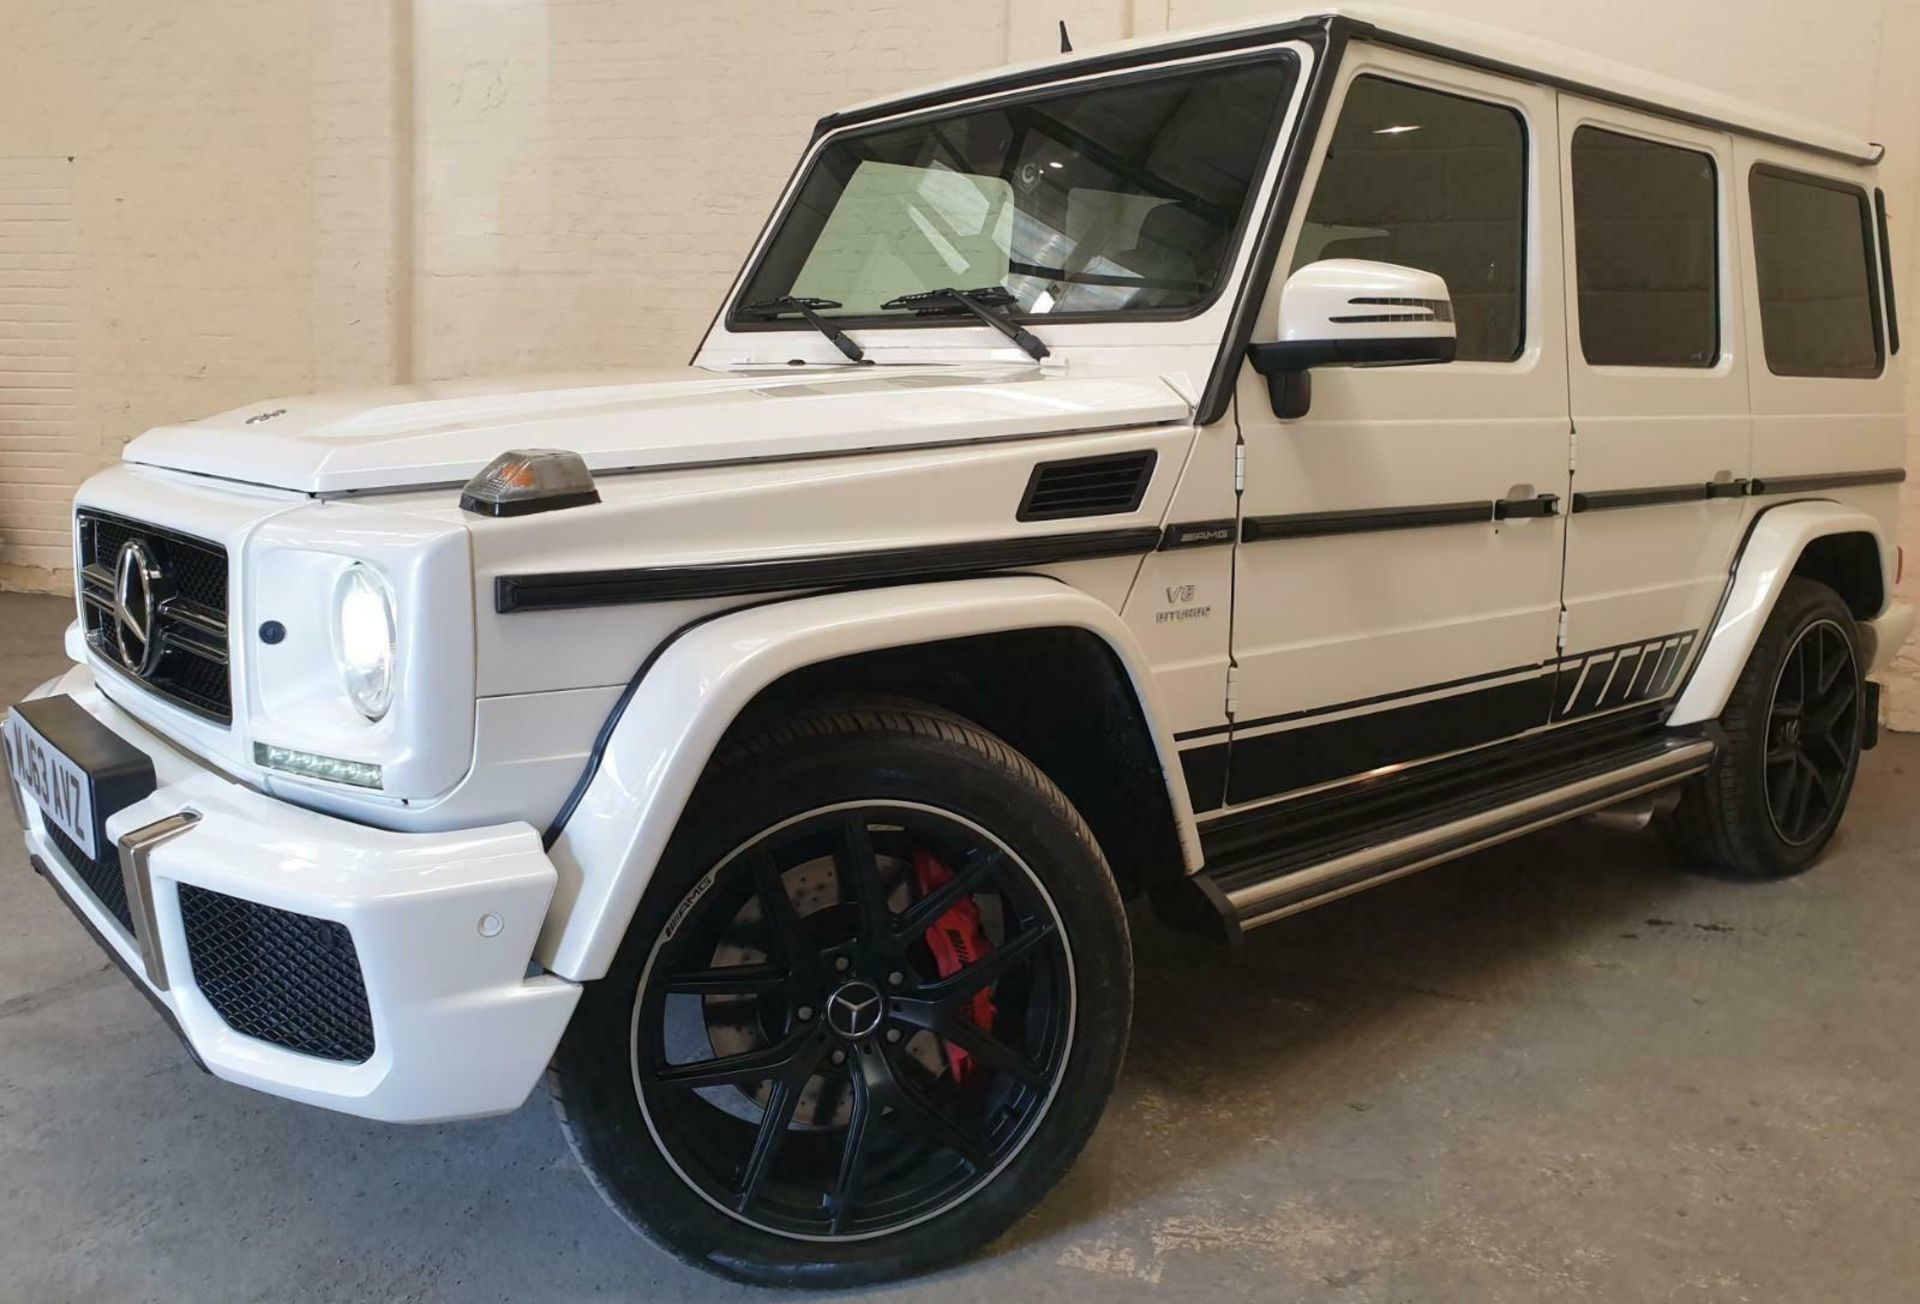 2014/63 REG MERCEDES-BENZ G63 AMG 5.5L AUTOMATIC, SHOWING 0 FORMER KEEPERS *NO VAT* - Image 5 of 12